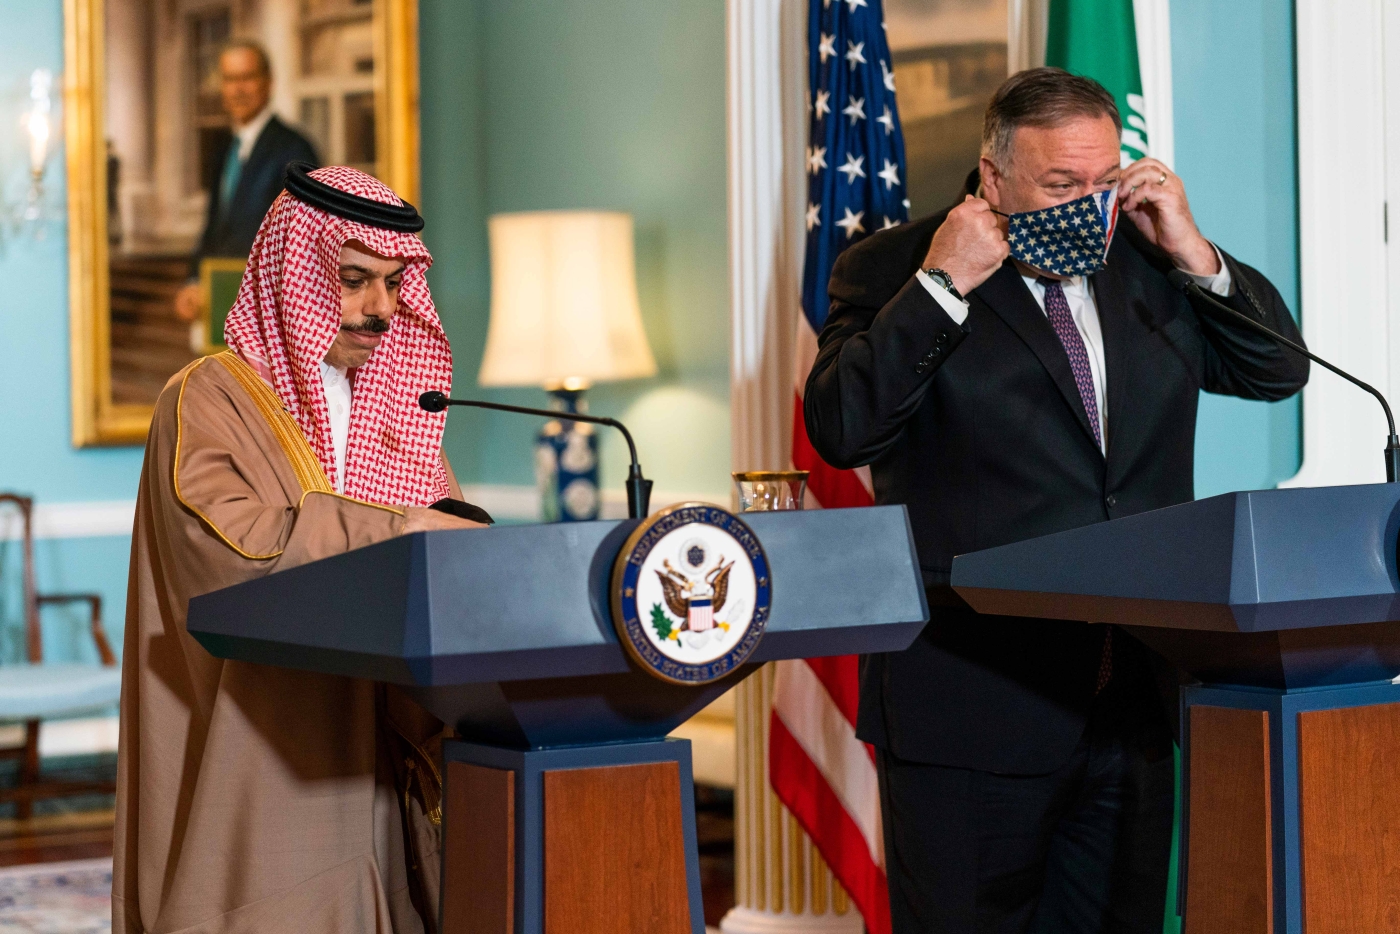 Saudi foreign minister Prince Faisal bin Farhan Al Saud and Secretary of State Mike Pompeo delivering their remarks at the State Department.